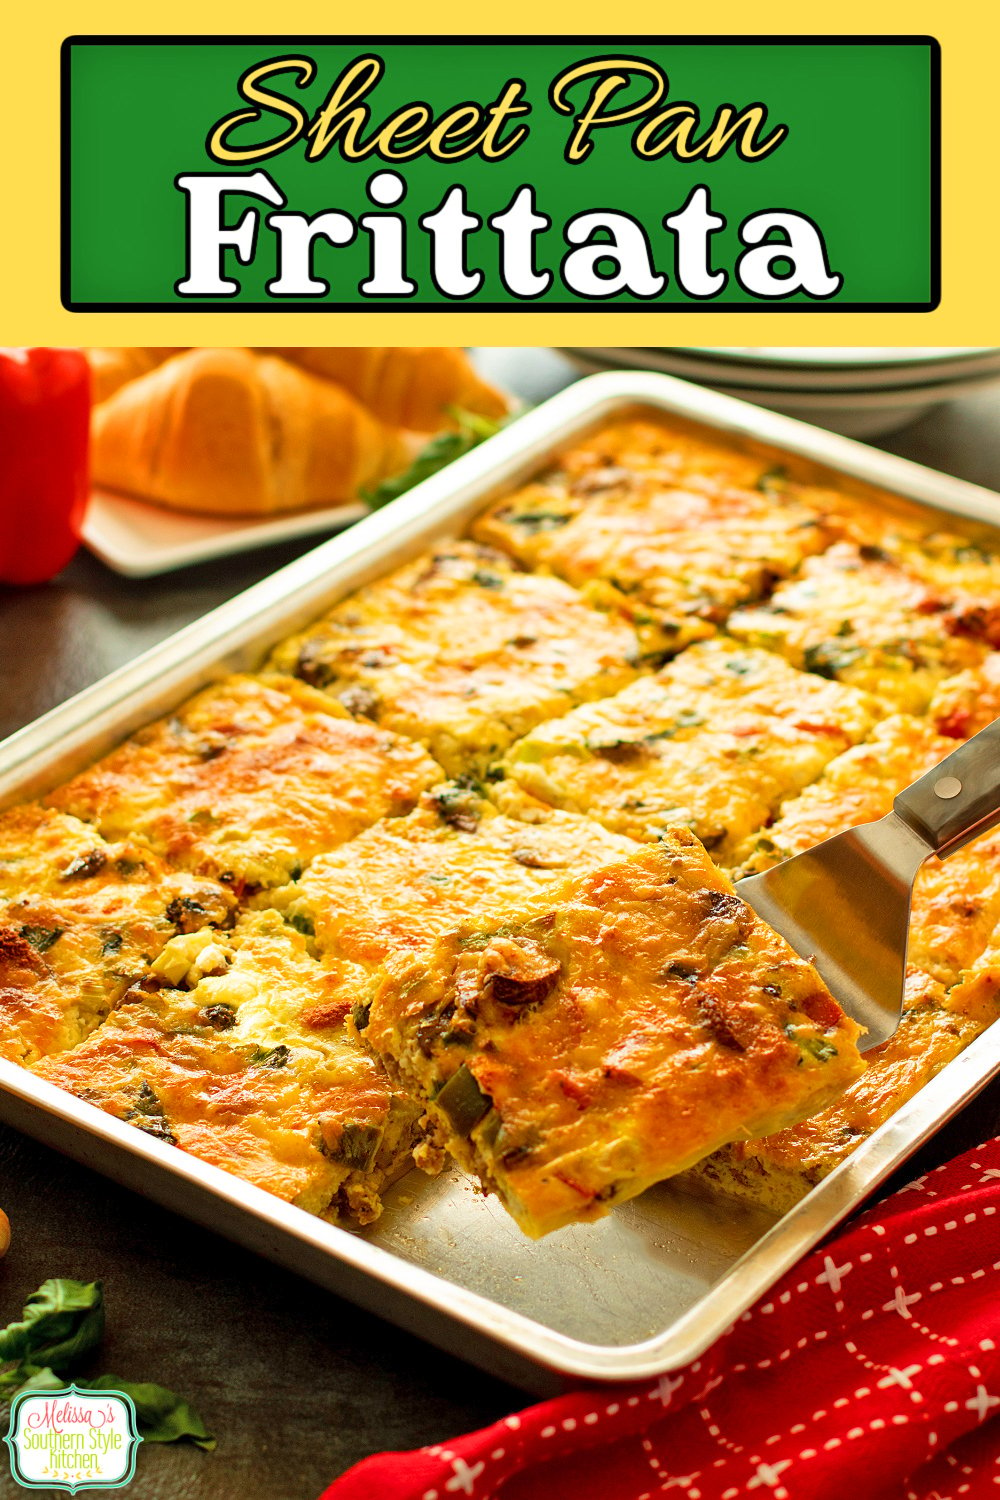 Make breakfast for everyone in one fell swoop with this Sheet Pan Frittata filled with Italian sausage, bell peppers and mushrooms. #frittata #sheetpanrecipes #sheetpanmeals #eggs #Italianfrittata via @melissasssk